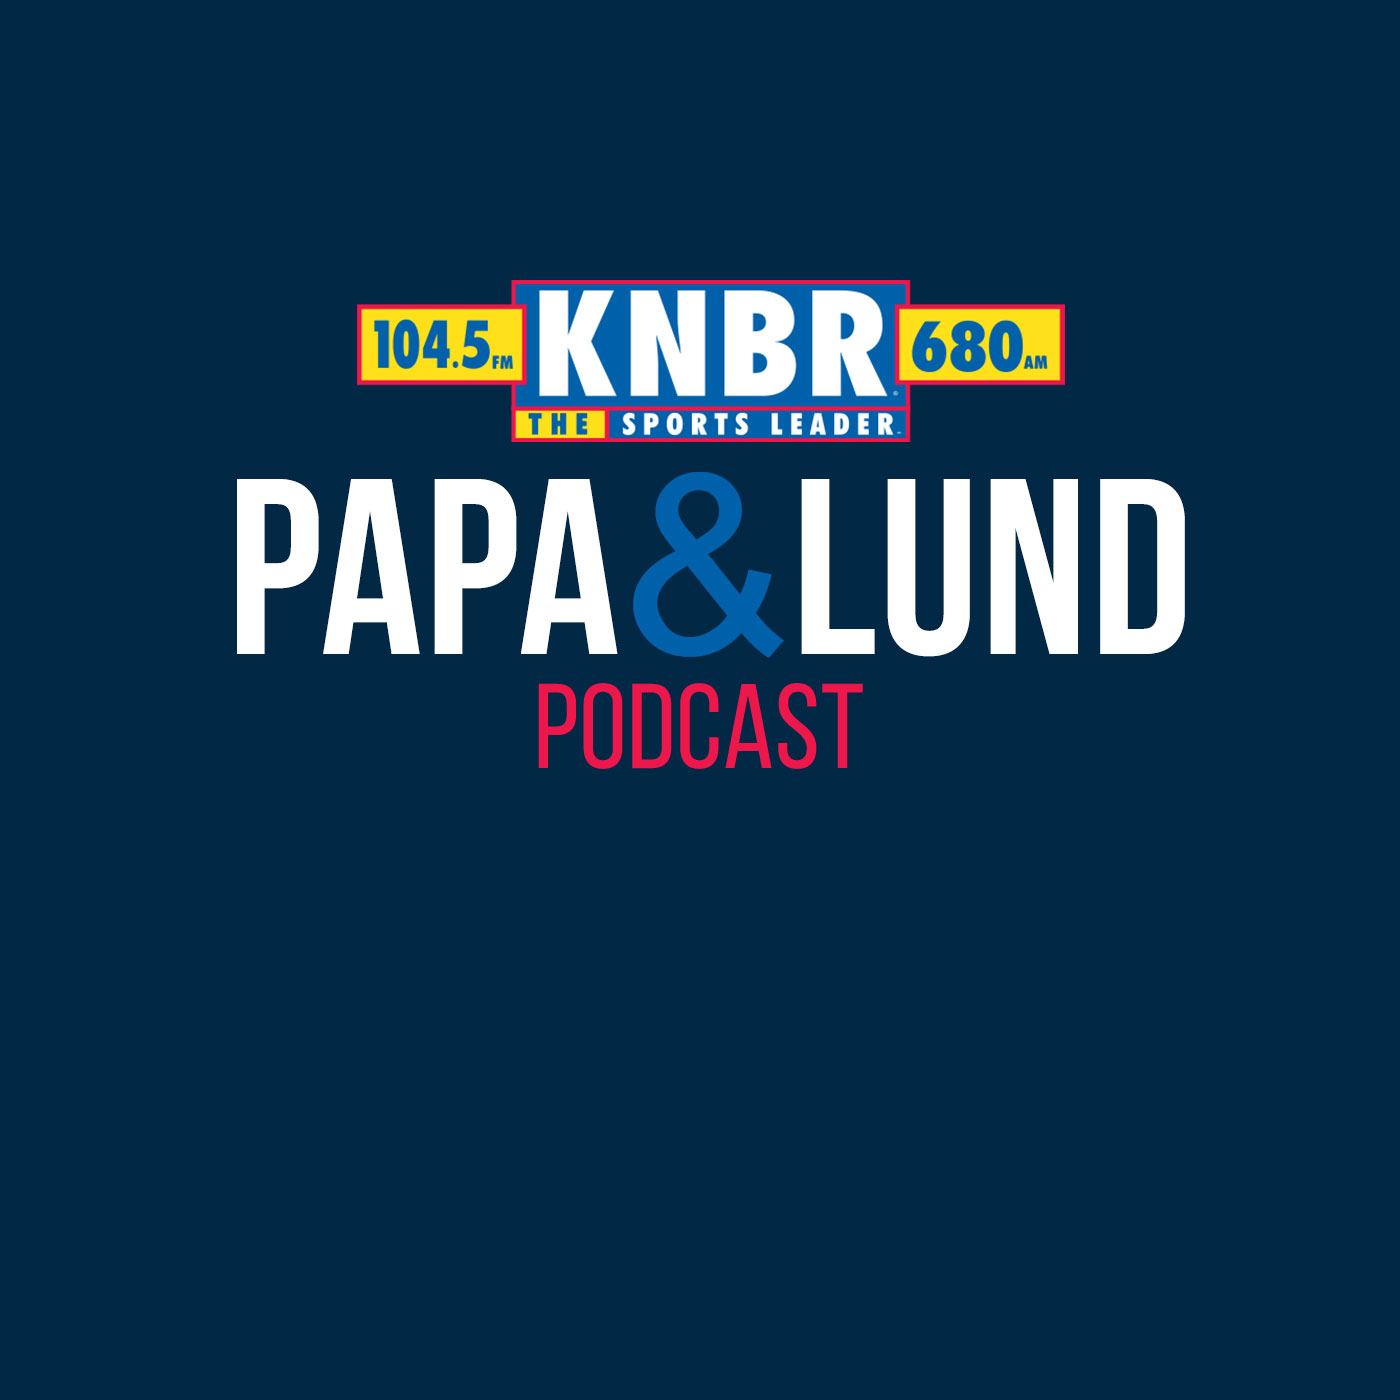 5-19 Zack Bayrouty joins Papa & Lund to discuss Patrick Bailey getting the call to the big leagues, what he adds behind the plate as well as Ryan Walker's dominance in the minors reminding him of a former Giants great out of the bullpen